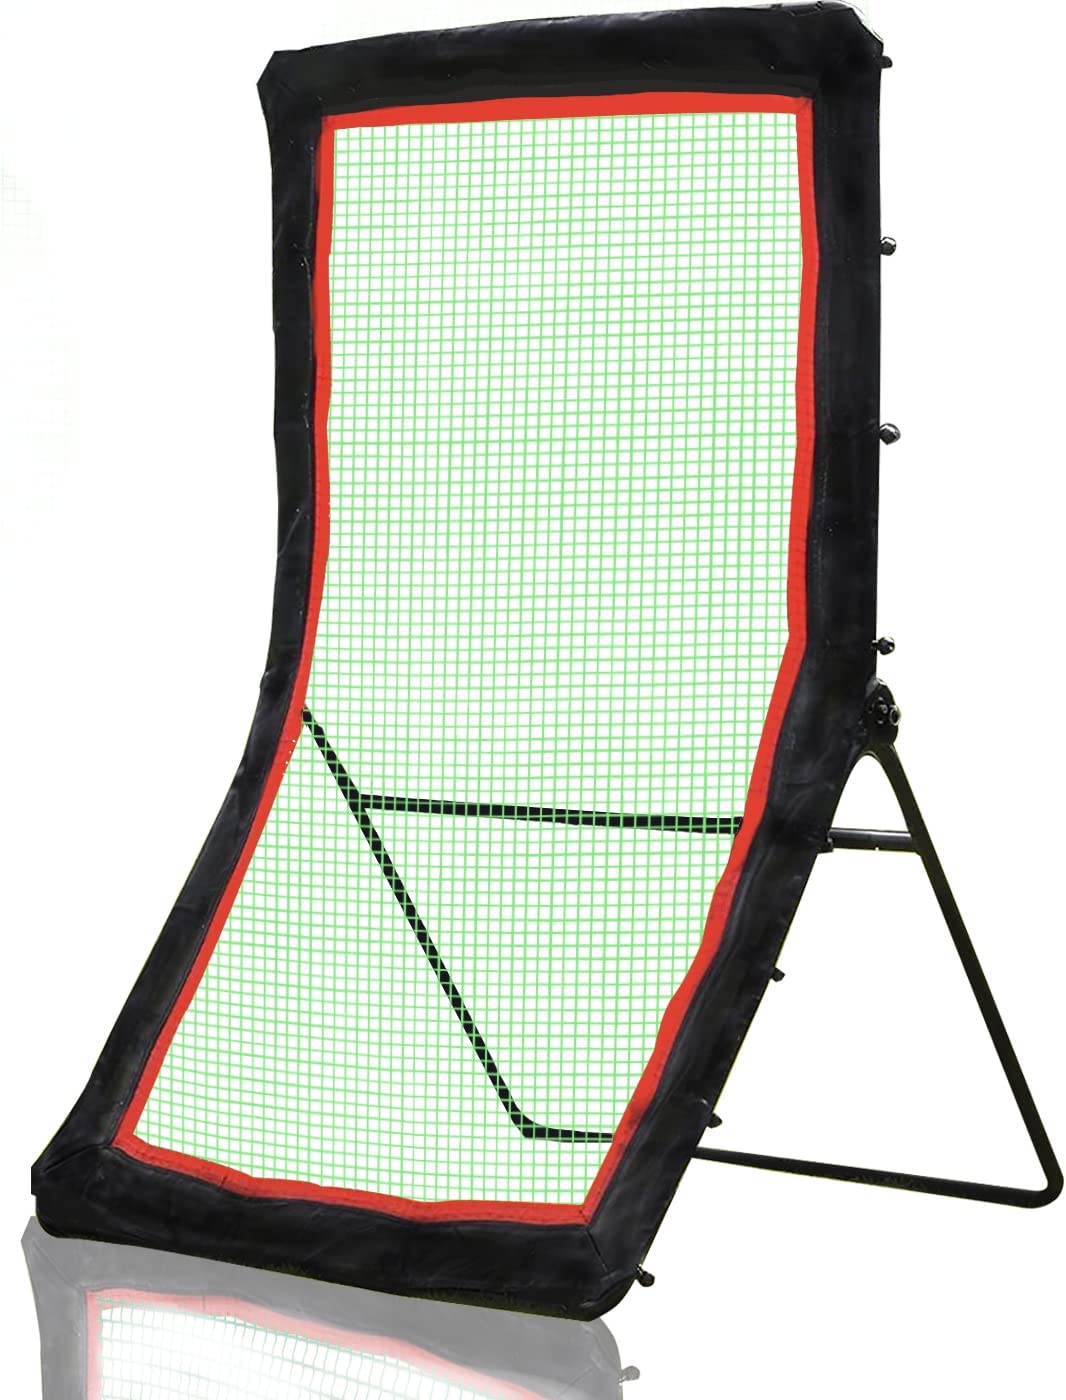 Lacrosse Rebounder, Folding Lacrosse Bounceback/Return Net, Thickened Rebounder Wall Target Cloth with Front and Back Extra Pitchback Netting